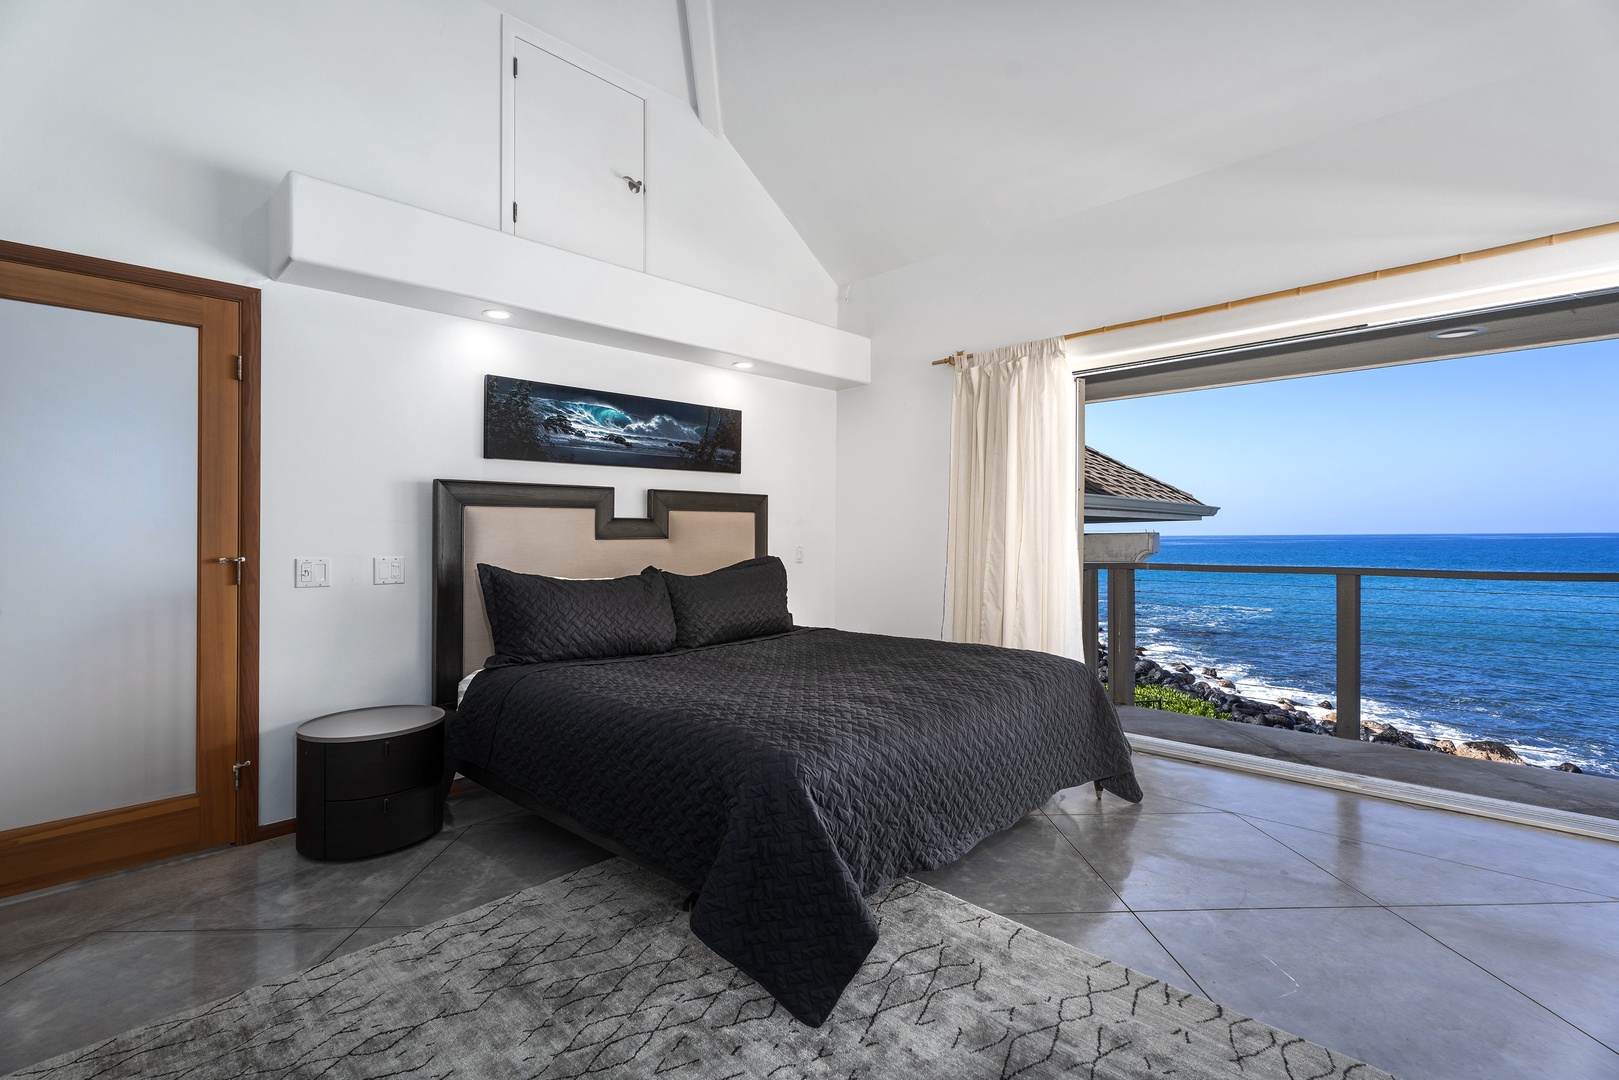 Kailua-Kona Vacation Rentals, Hale Kope Kai - Primary Suite equipped with King bed, A/C, Lanai, and ensuite